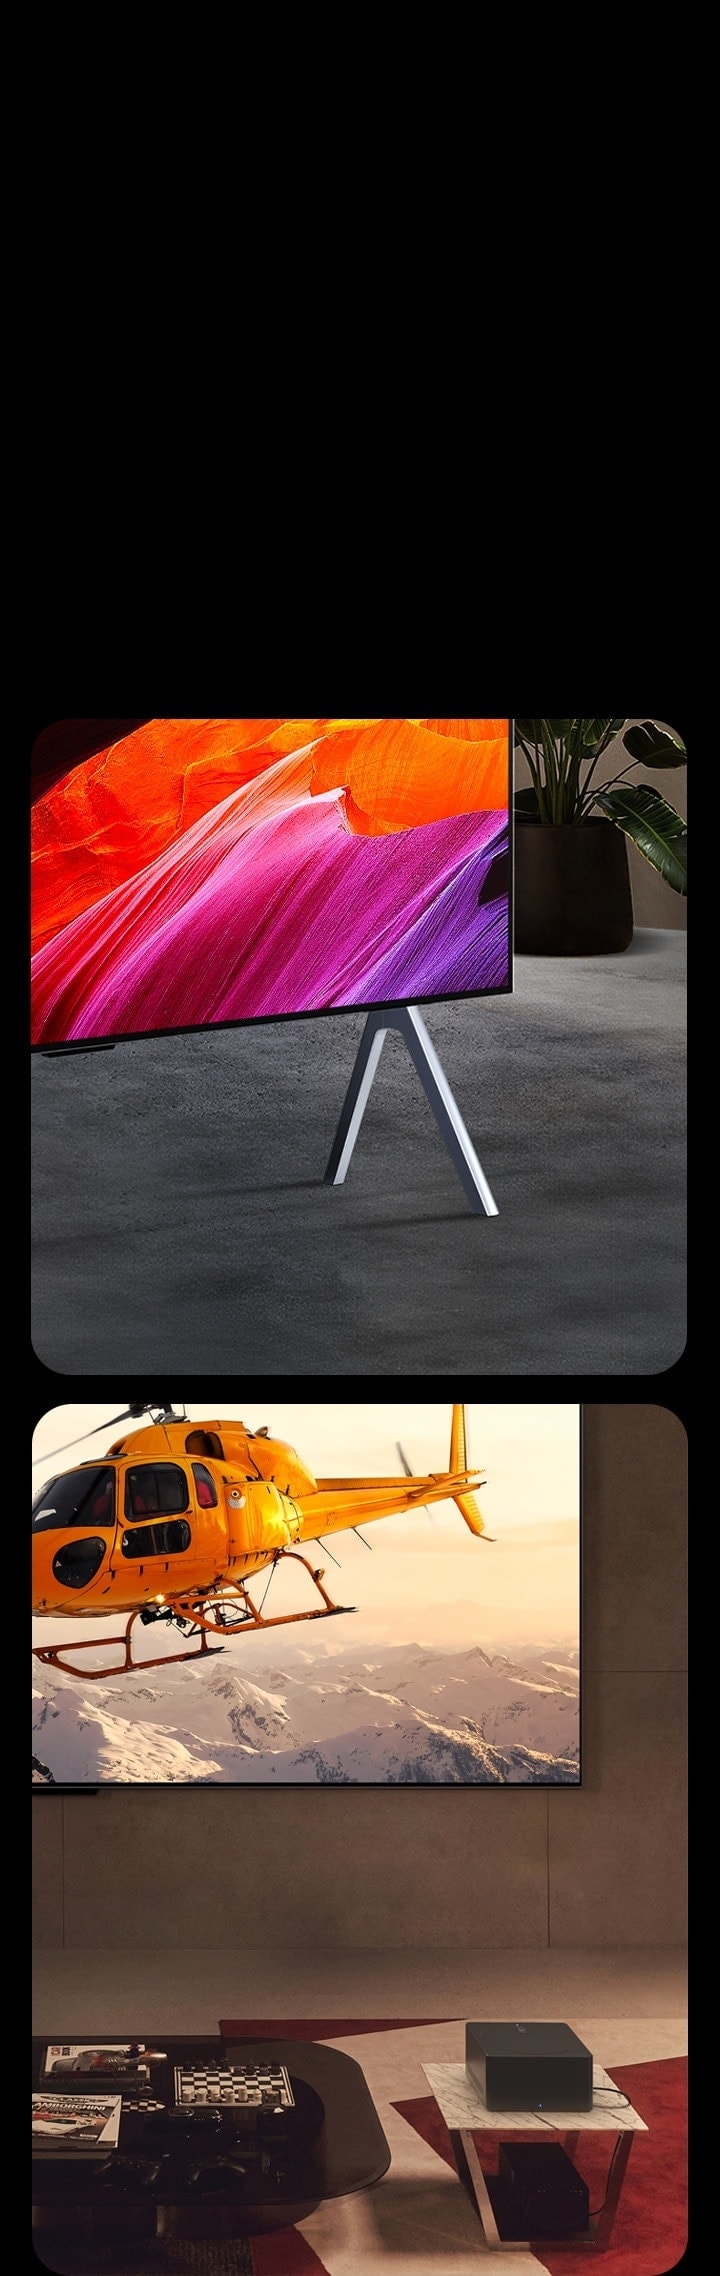 On the left, a close-up angled perspective of LG SIGNATURE OLED M4 on a stand and abstract pink and orange art on the screen. On the right, Zero Connect Box on a small table in front of LG SIGNATURE OLED M4 mounted on the wall and a bright image of an orange helicopter over snowy mountains.